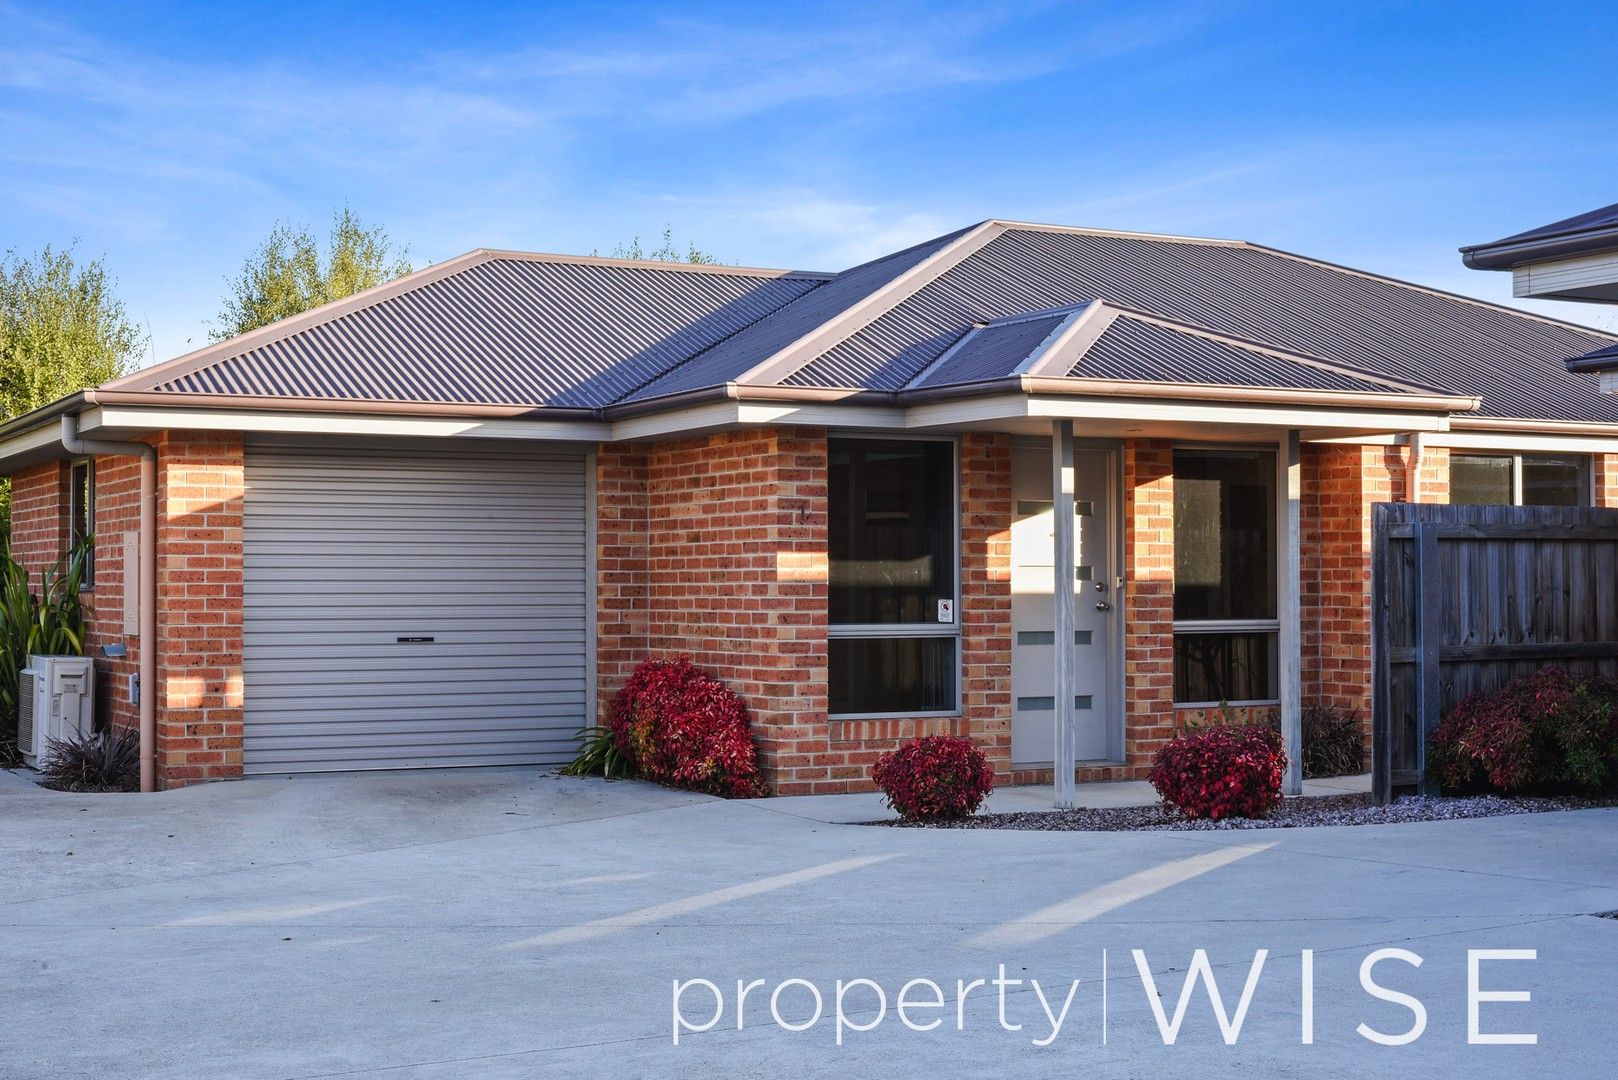 2 bedrooms House in 1/4 Opal Place PERTH TAS, 7300